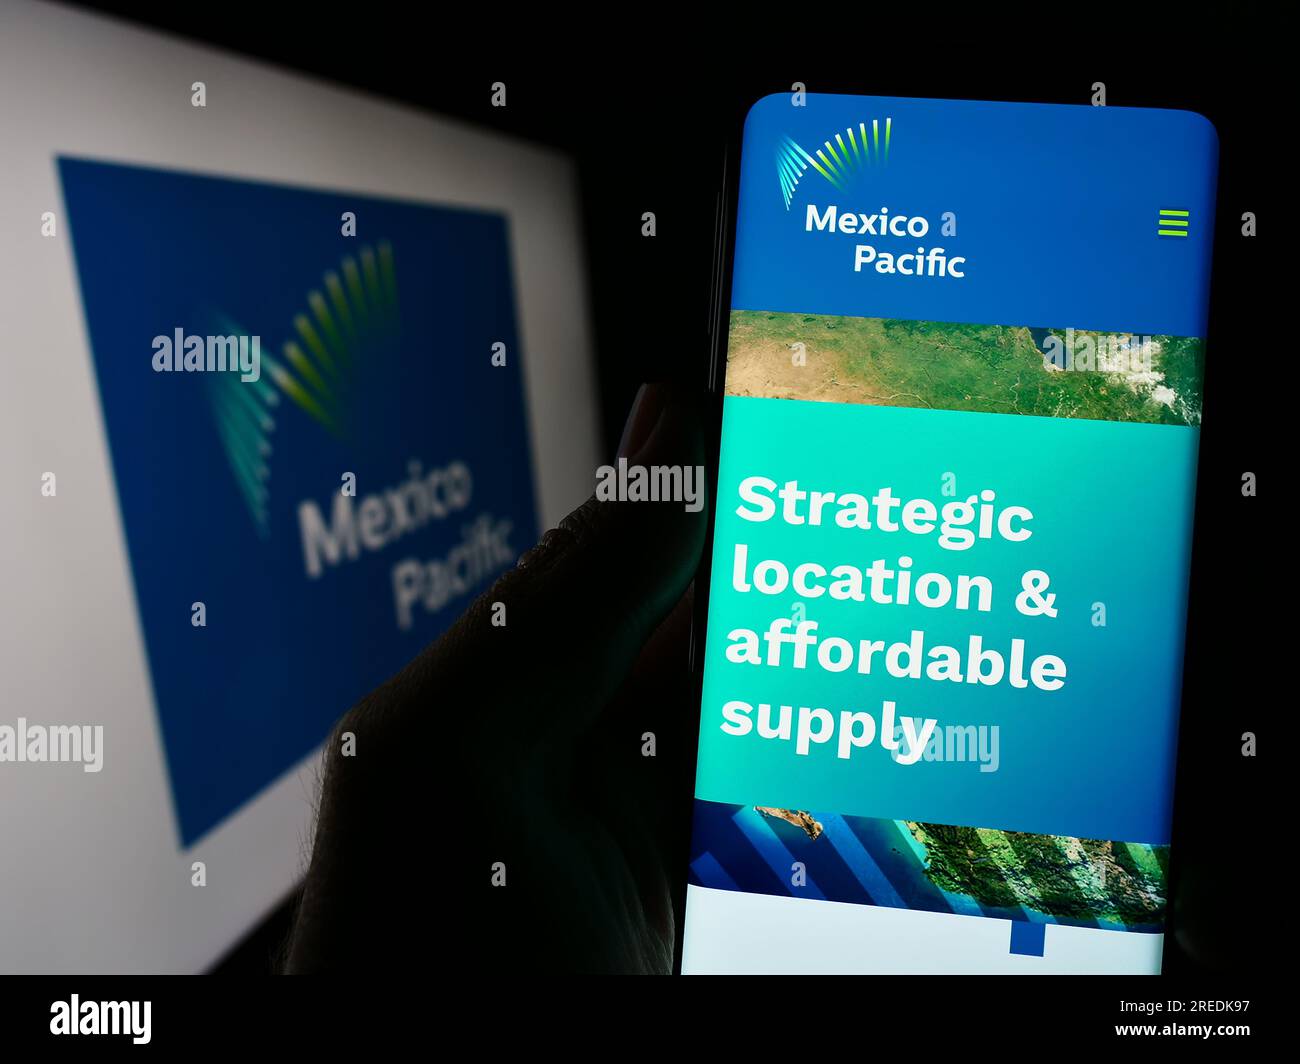 Person holding smartphone with website of company Mexico Pacific Ltd. LLC on screen in front of business logo. Focus on center of phone display. Stock Photo